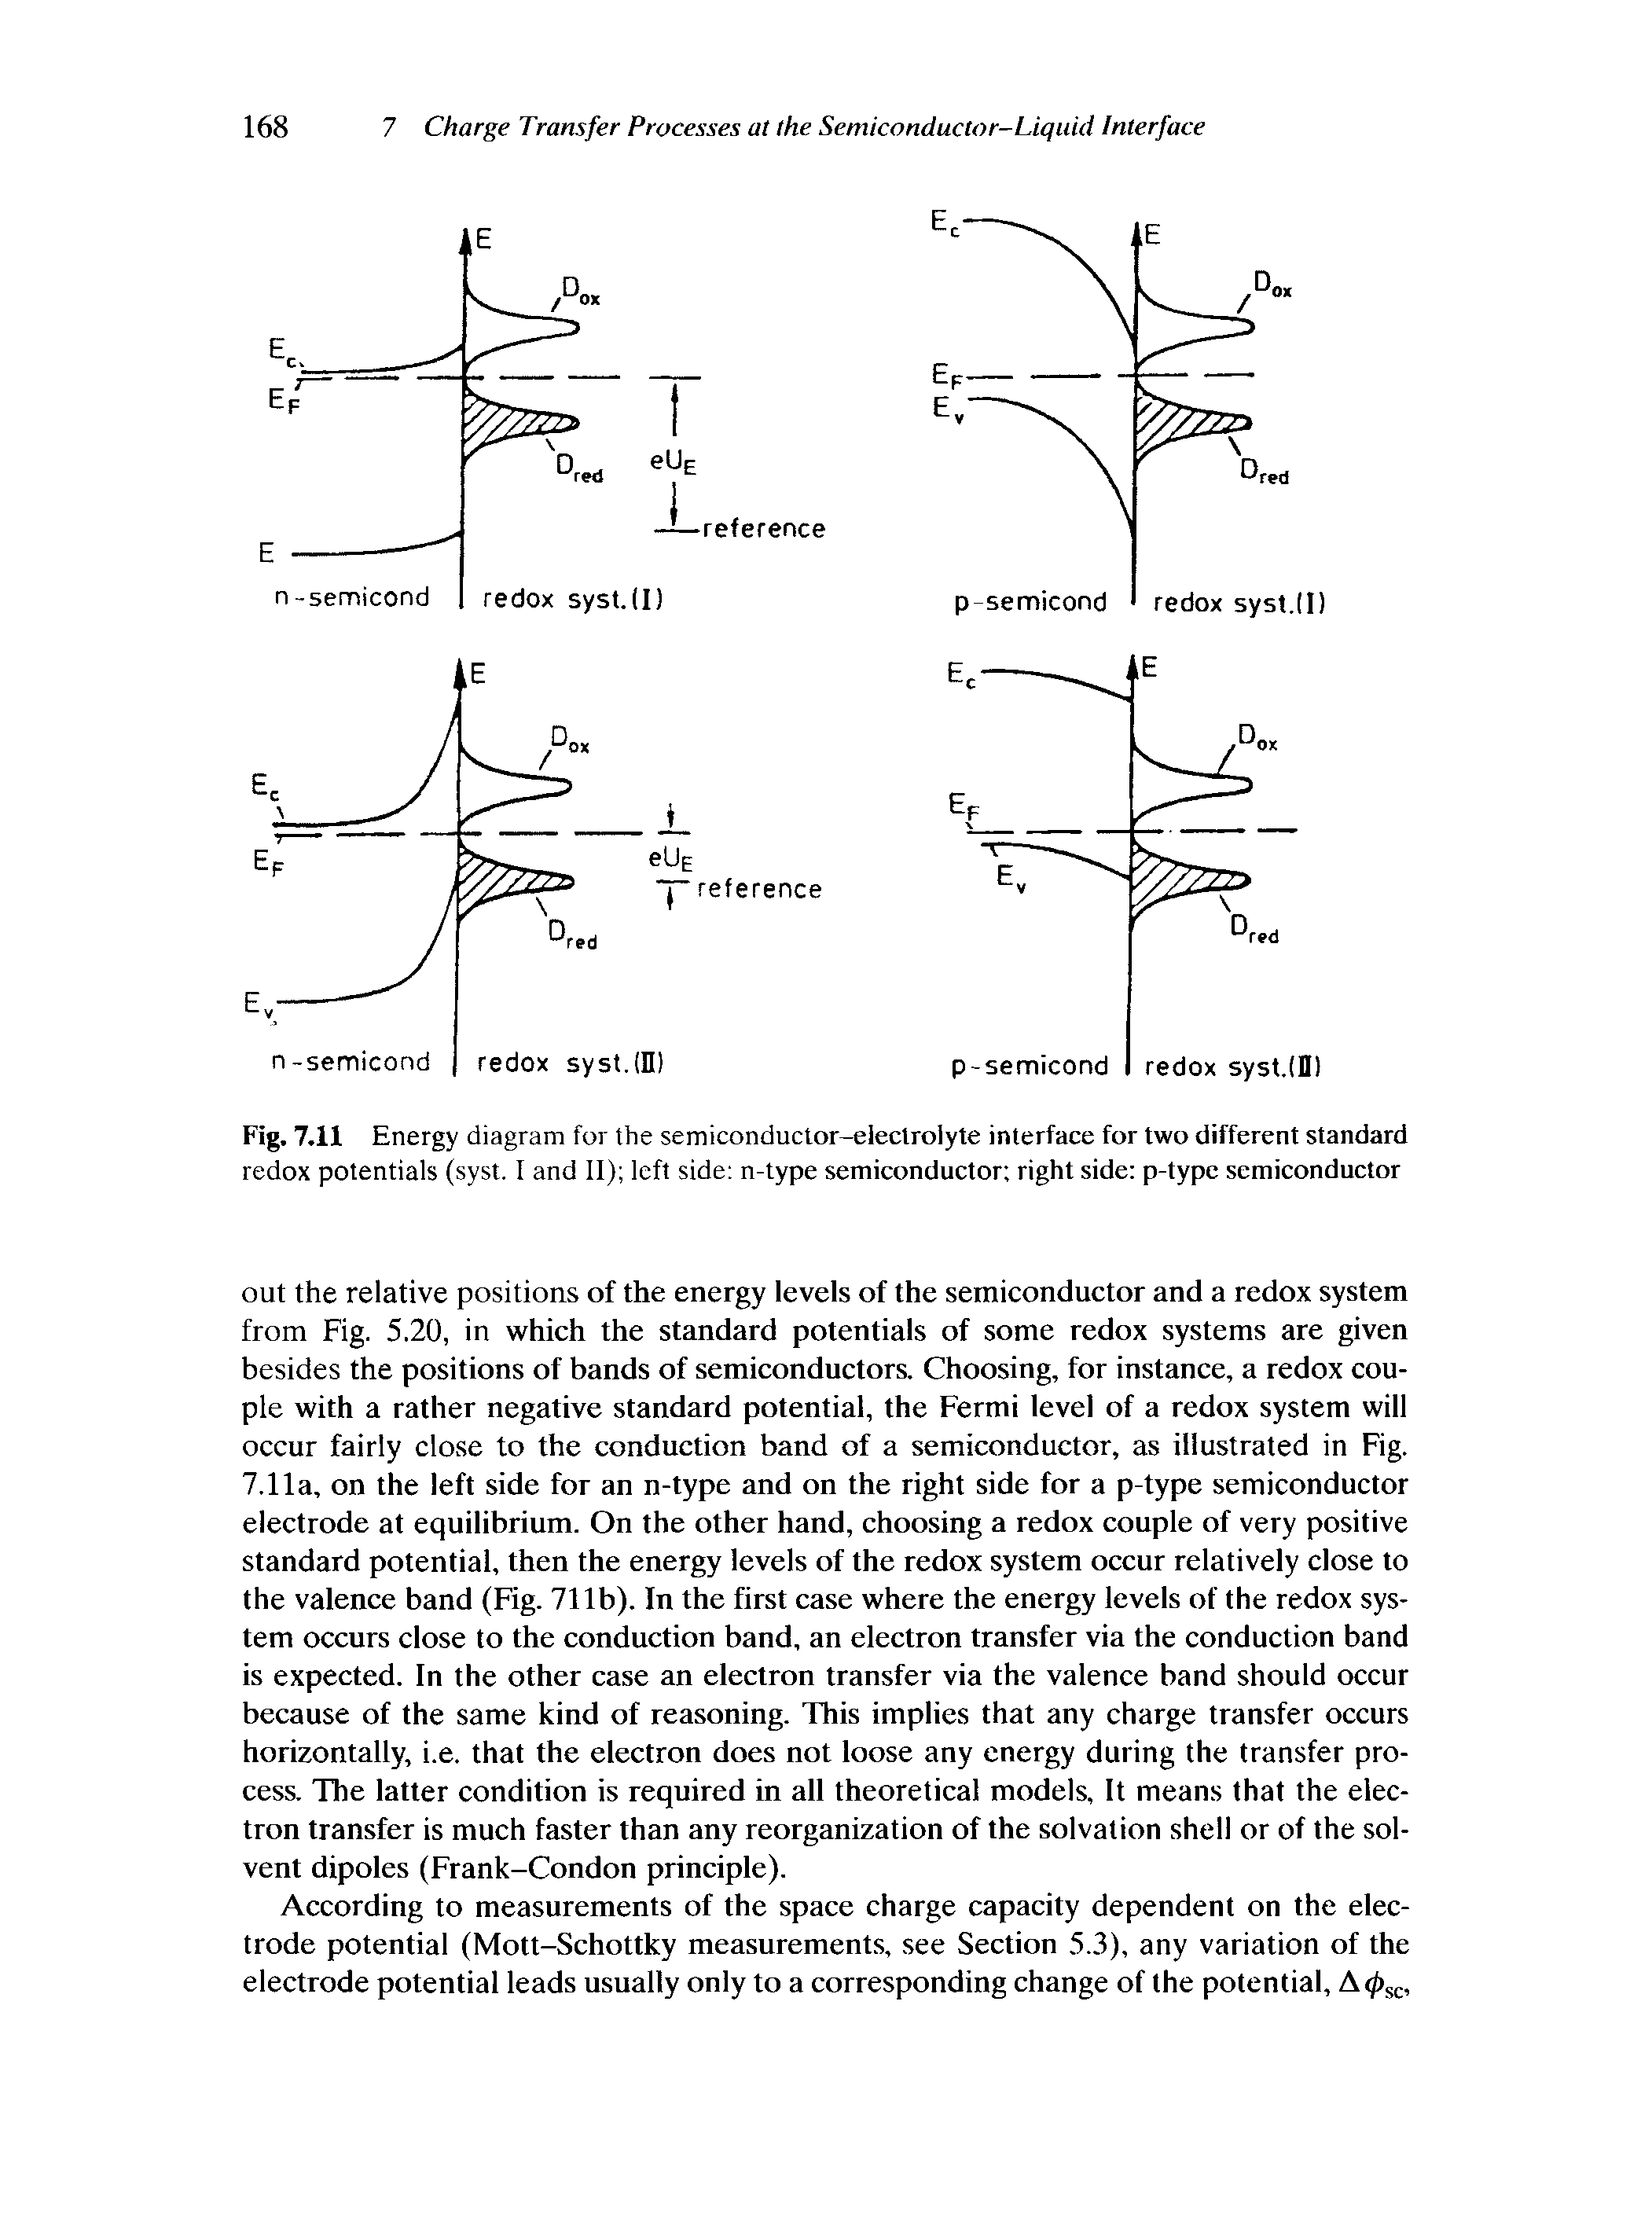 Fig. 7.11 Energy diagram for the semiconductor-electrolyte interface for two different standard redox potentials (syst. I and II) left side n-type semiconductor right side p-typc semiconductor...